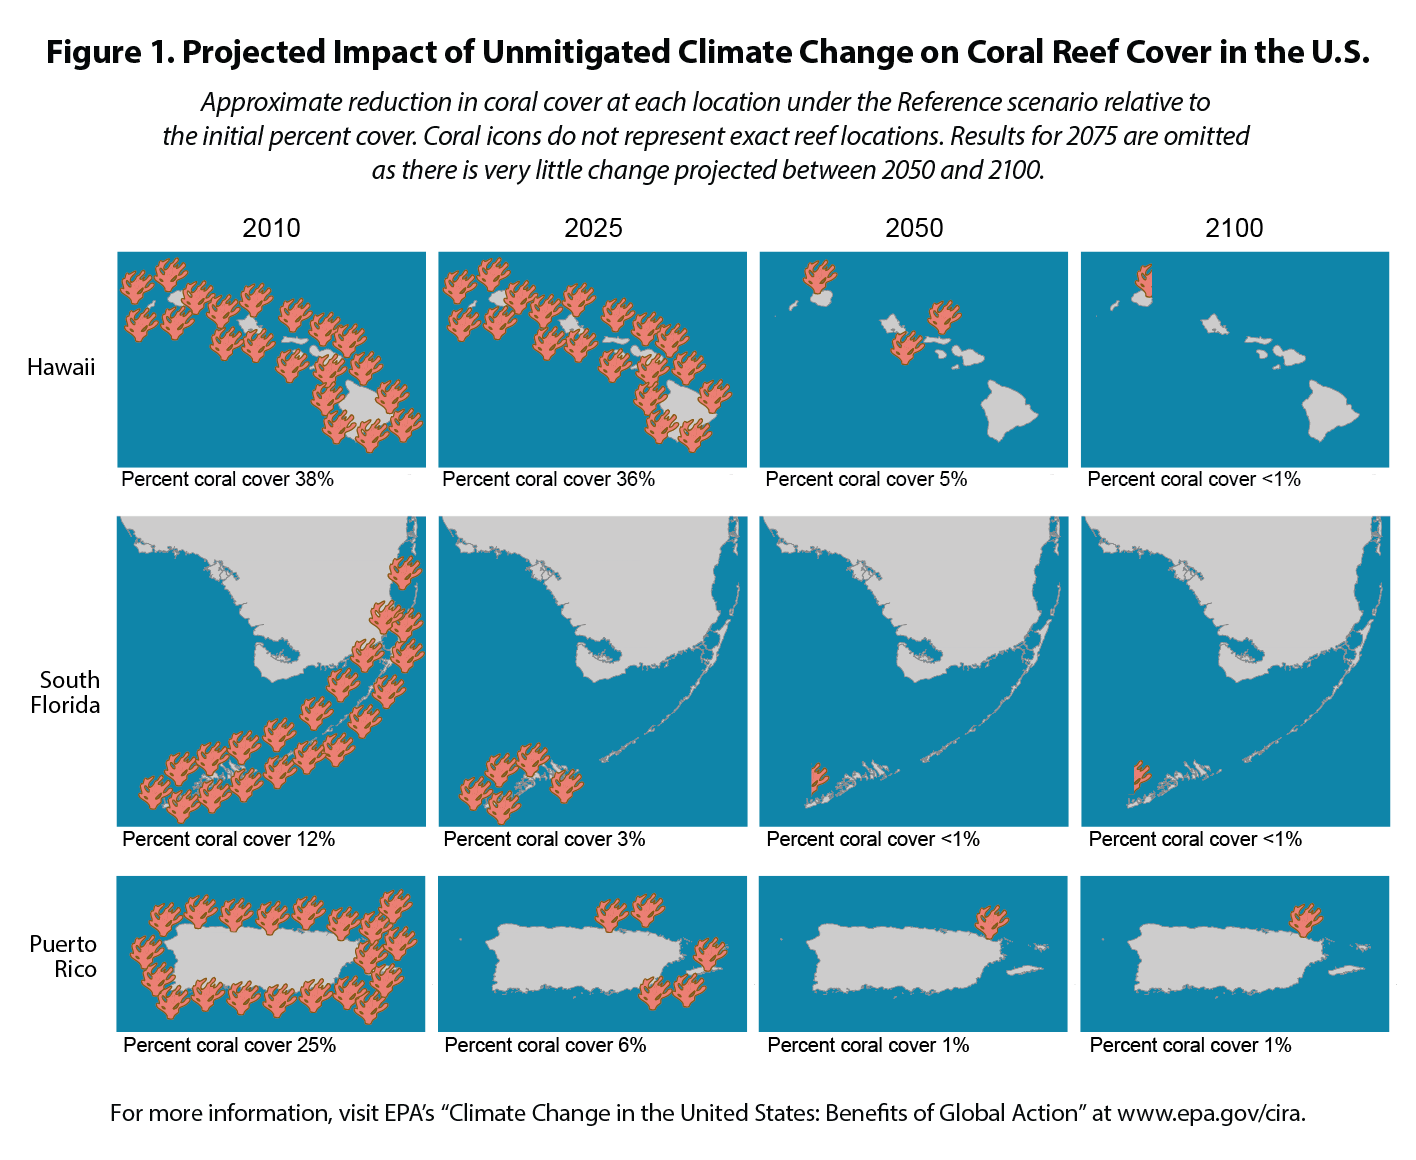 Climate Change Impacts on Coral Reefs